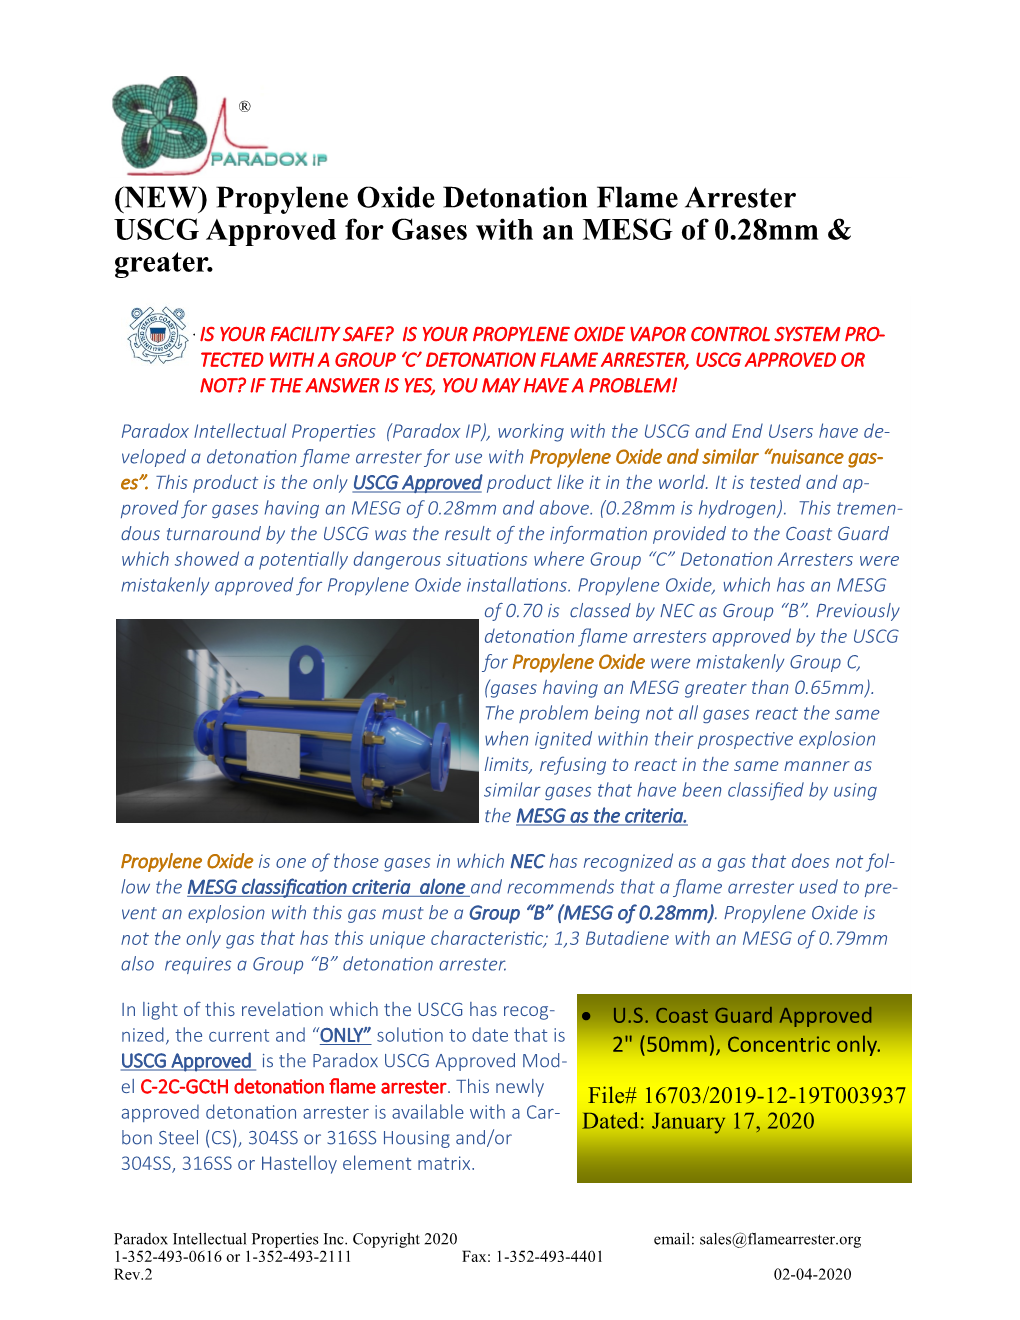 Propylene Oxide Detonation Flame Arrester USCG Approved for Gases with an MESG of 0.28Mm & Greater